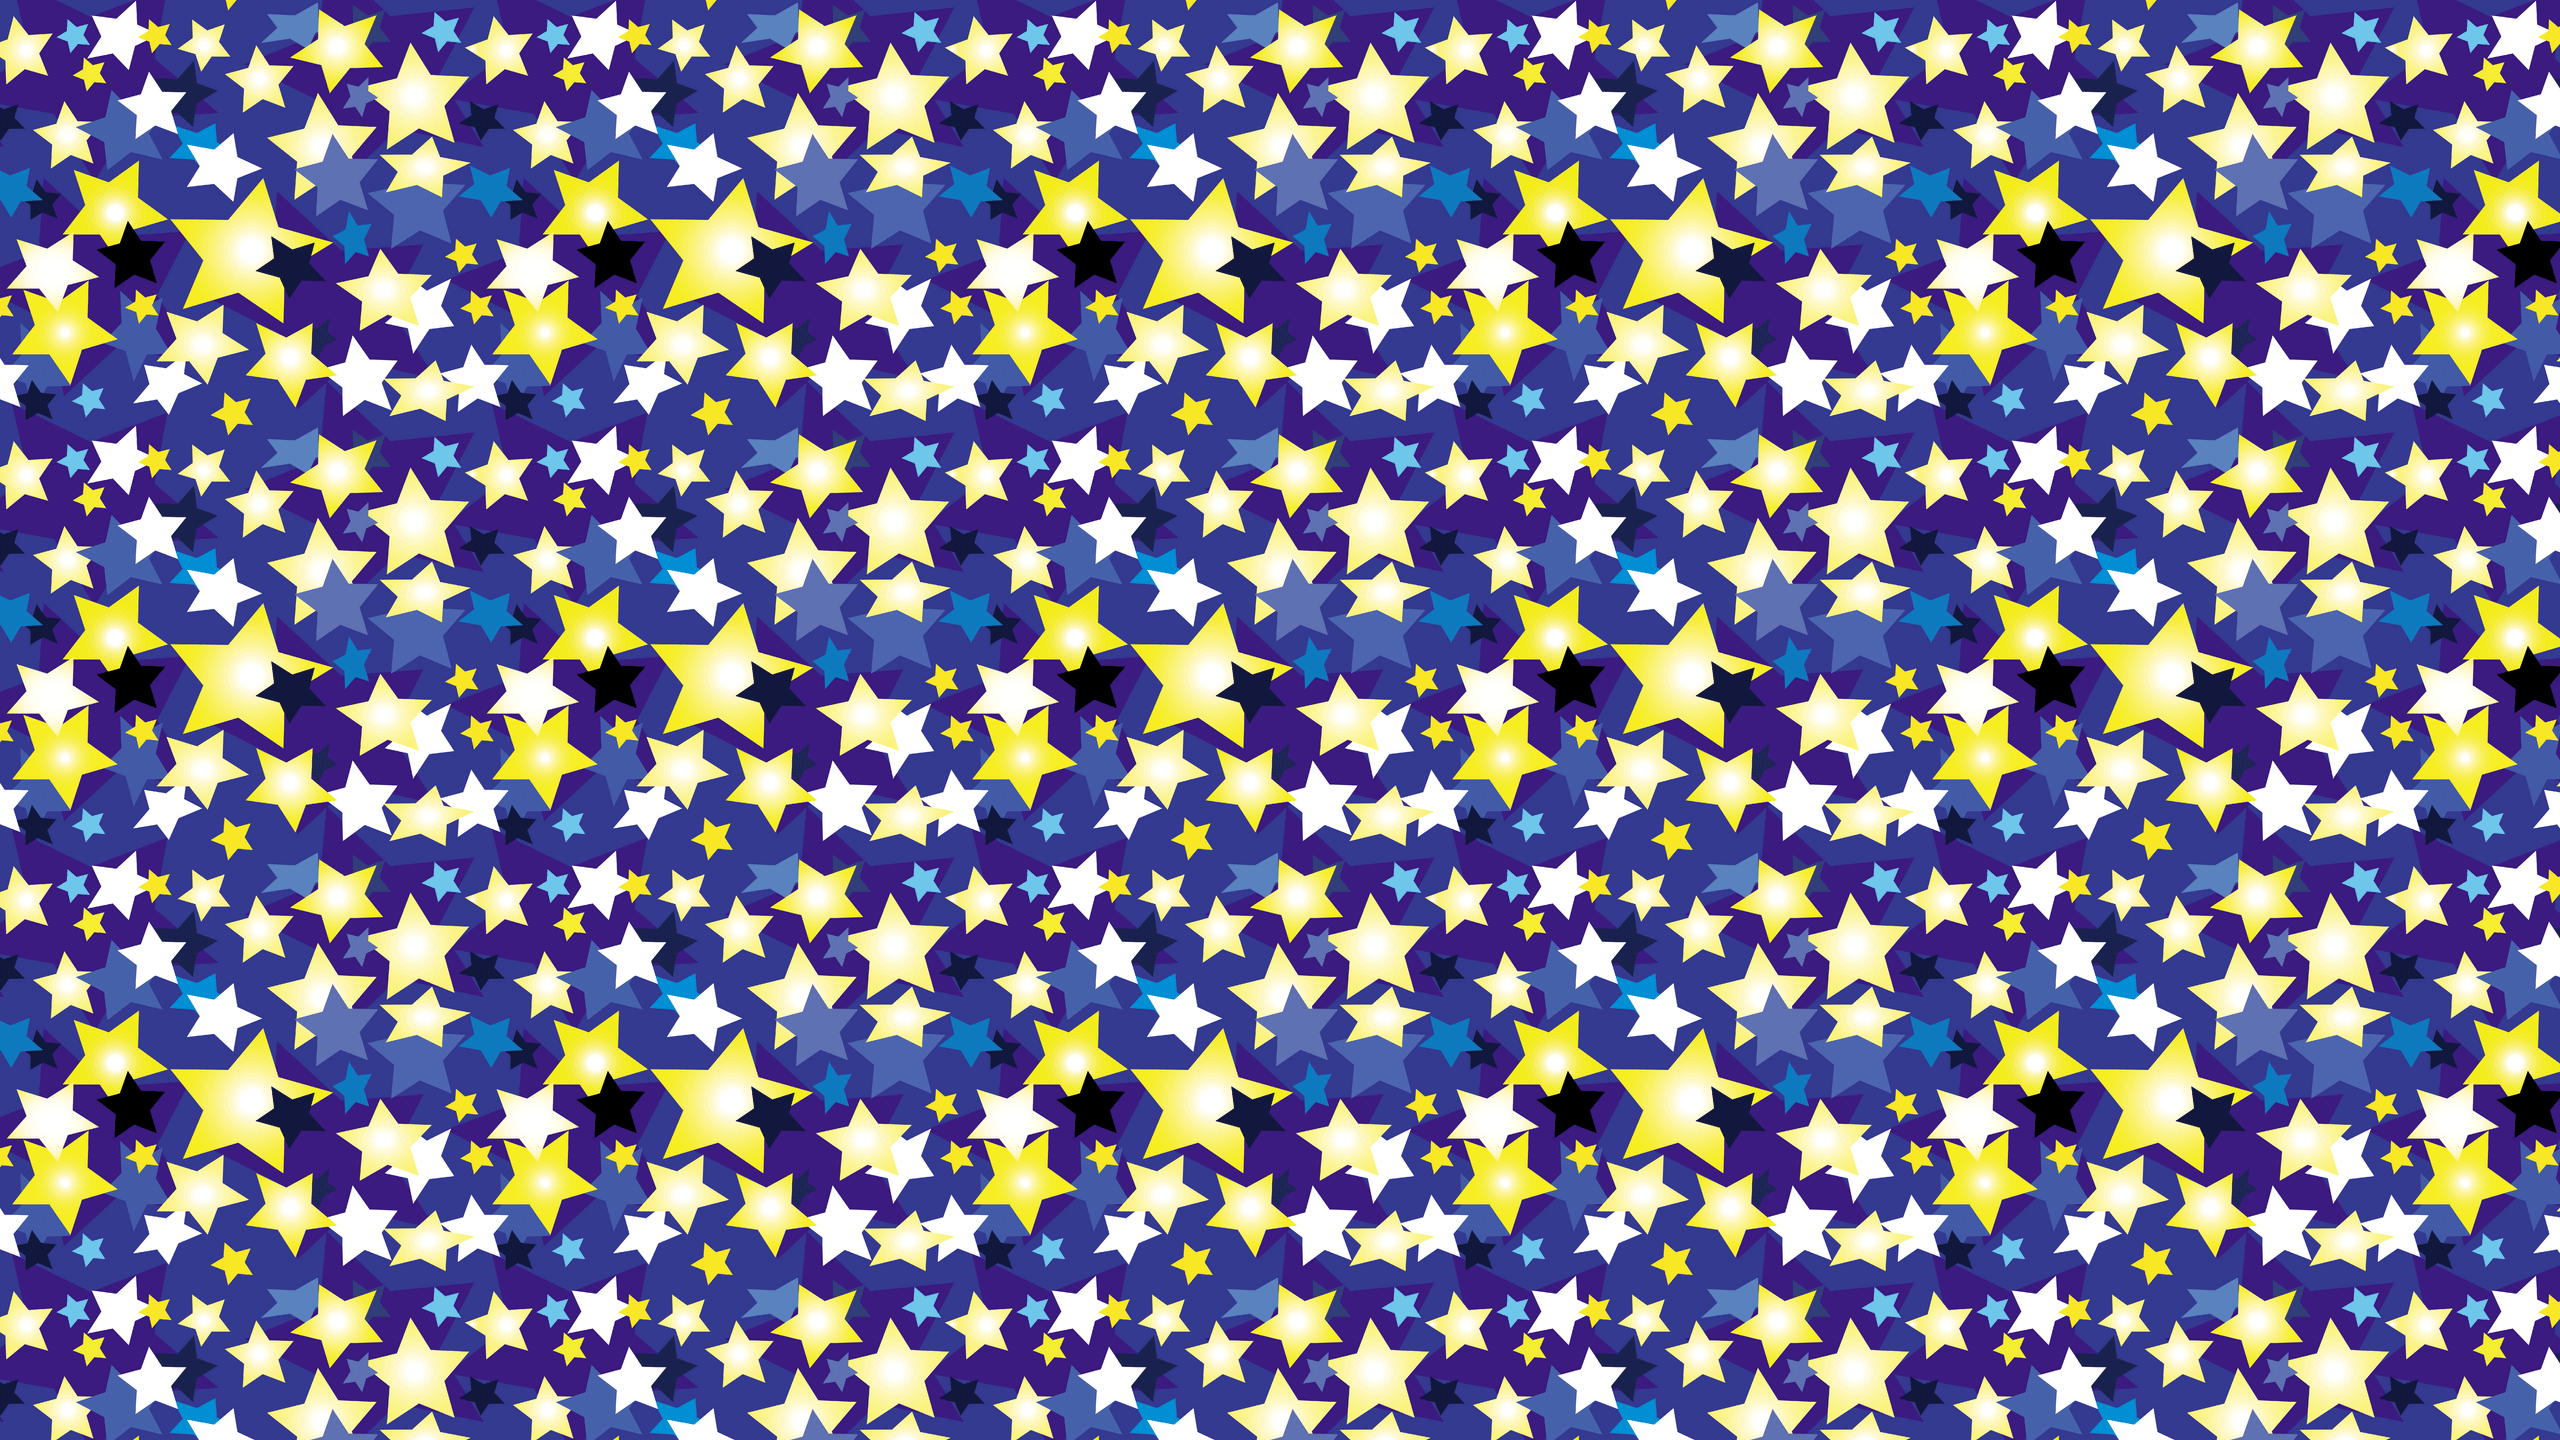 Its A Starry Night Desktop Wallpaper Is Easy Just Save The